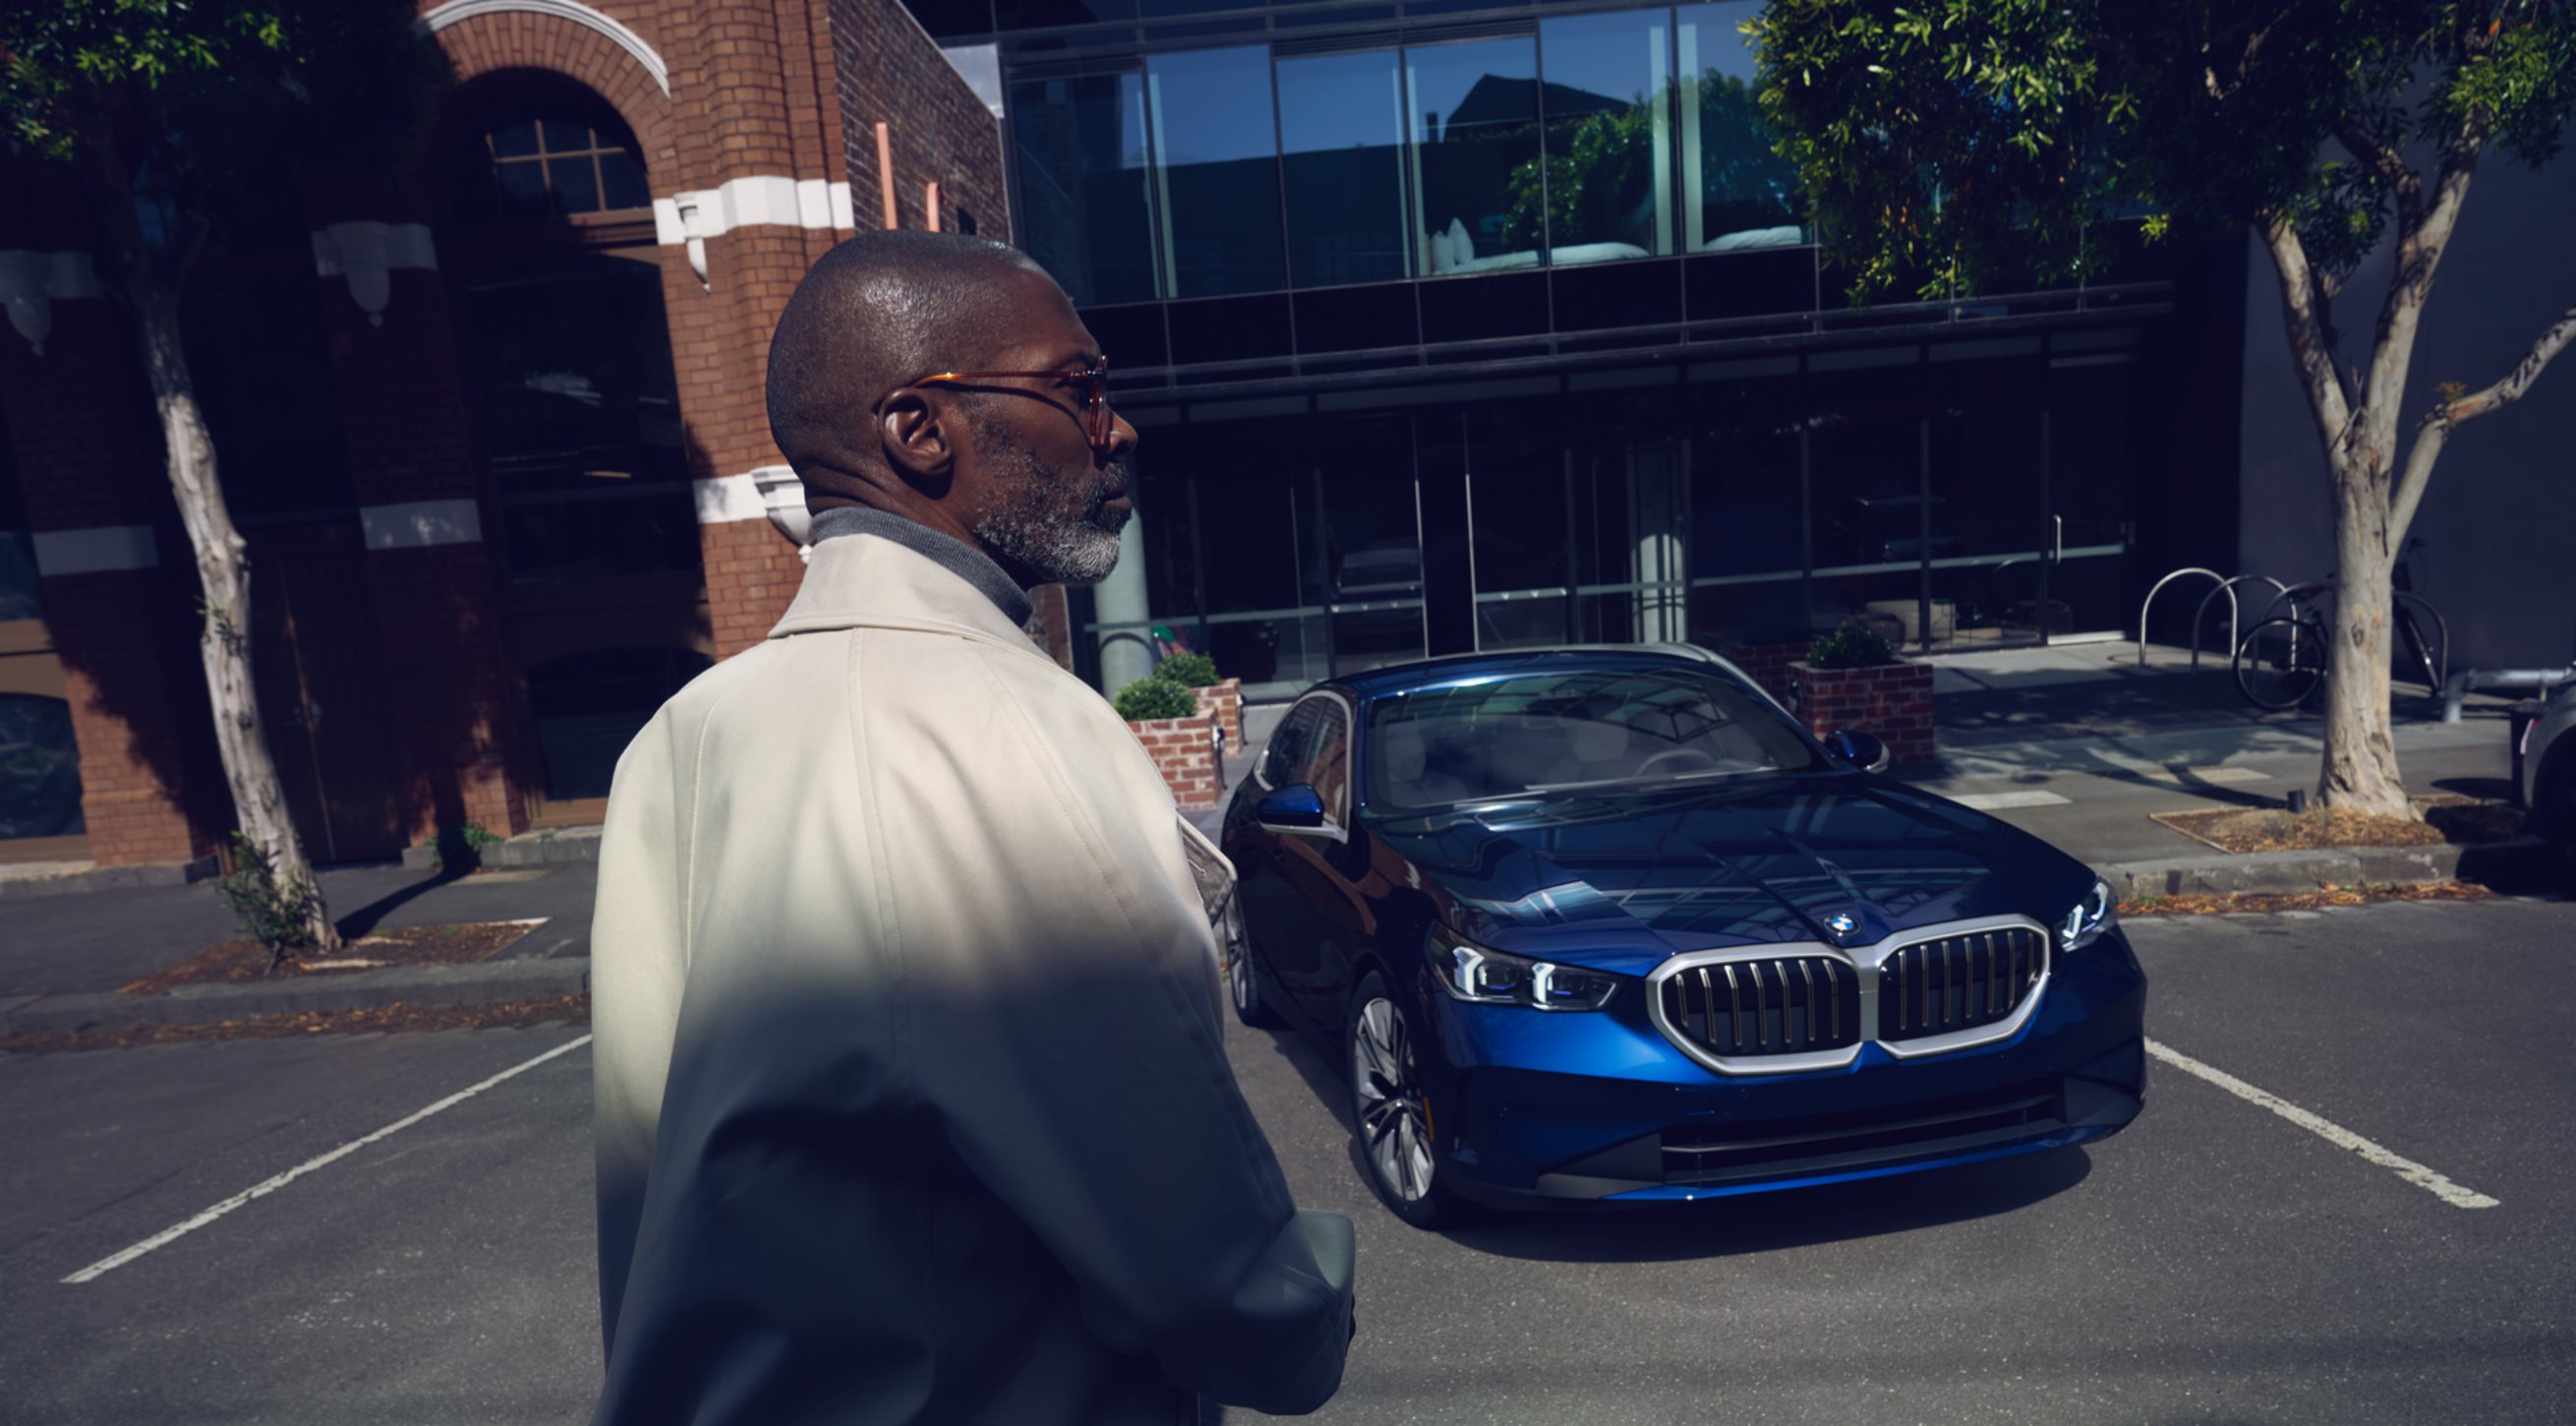 2024 BMW 5 Series in blue parked in front of building with man in foreground.